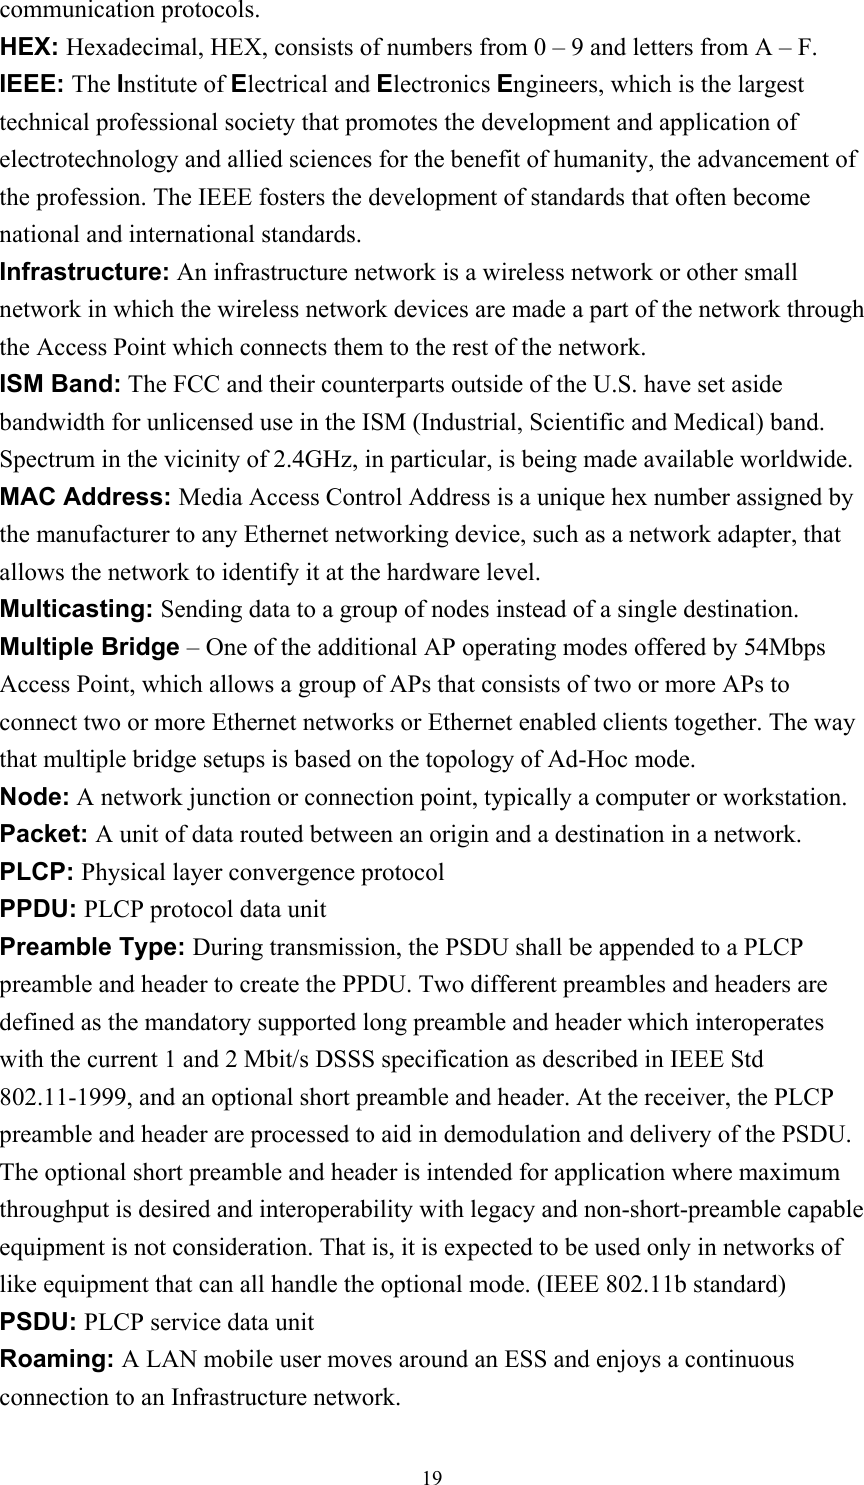 communication protocols. HEX: Hexadecimal, HEX, consists of numbers from 0 – 9 and letters from A – F. IEEE: The Institute of Electrical and Electronics Engineers, which is the largest technical professional society that promotes the development and application of electrotechnology and allied sciences for the benefit of humanity, the advancement of the profession. The IEEE fosters the development of standards that often become national and international standards. Infrastructure: An infrastructure network is a wireless network or other small network in which the wireless network devices are made a part of the network through the Access Point which connects them to the rest of the network. ISM Band: The FCC and their counterparts outside of the U.S. have set aside bandwidth for unlicensed use in the ISM (Industrial, Scientific and Medical) band.   Spectrum in the vicinity of 2.4GHz, in particular, is being made available worldwide. MAC Address: Media Access Control Address is a unique hex number assigned by the manufacturer to any Ethernet networking device, such as a network adapter, that allows the network to identify it at the hardware level. Multicasting: Sending data to a group of nodes instead of a single destination. Multiple Bridge – One of the additional AP operating modes offered by 54Mbps Access Point, which allows a group of APs that consists of two or more APs to connect two or more Ethernet networks or Ethernet enabled clients together. The way that multiple bridge setups is based on the topology of Ad-Hoc mode. Node: A network junction or connection point, typically a computer or workstation. Packet: A unit of data routed between an origin and a destination in a network. PLCP: Physical layer convergence protocol PPDU: PLCP protocol data unit Preamble Type: During transmission, the PSDU shall be appended to a PLCP preamble and header to create the PPDU. Two different preambles and headers are defined as the mandatory supported long preamble and header which interoperates with the current 1 and 2 Mbit/s DSSS specification as described in IEEE Std 802.11-1999, and an optional short preamble and header. At the receiver, the PLCP preamble and header are processed to aid in demodulation and delivery of the PSDU.   The optional short preamble and header is intended for application where maximum throughput is desired and interoperability with legacy and non-short-preamble capable equipment is not consideration. That is, it is expected to be used only in networks of like equipment that can all handle the optional mode. (IEEE 802.11b standard) PSDU: PLCP service data unit Roaming: A LAN mobile user moves around an ESS and enjoys a continuous connection to an Infrastructure network.  19